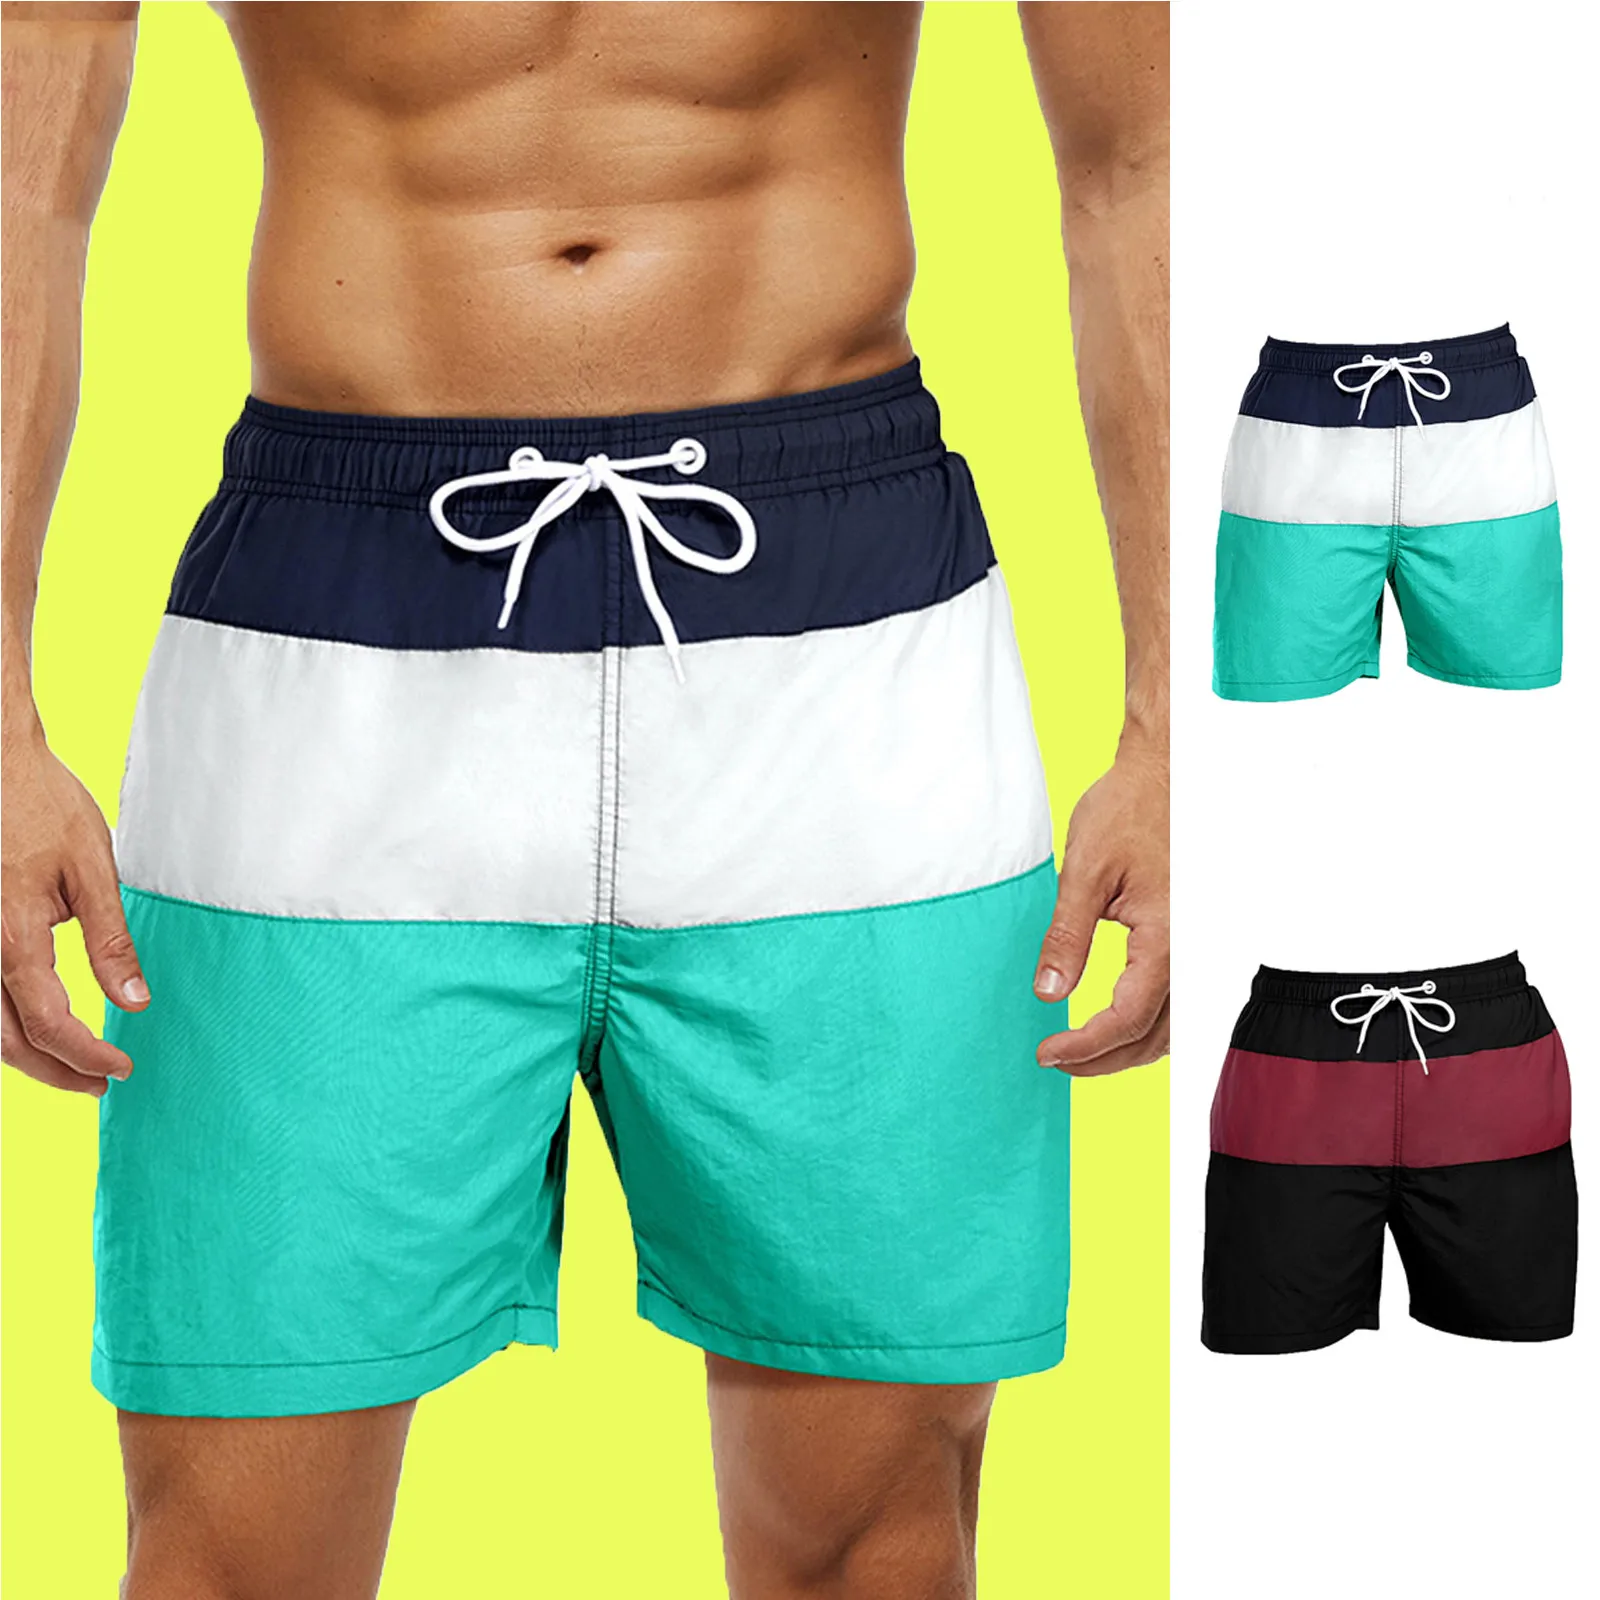 

Summer Casual Men's Shorts Splicing Swim Trunks Quick Dry Beach Surfing Running Swimming Watershort Shorts For Men's Clothing